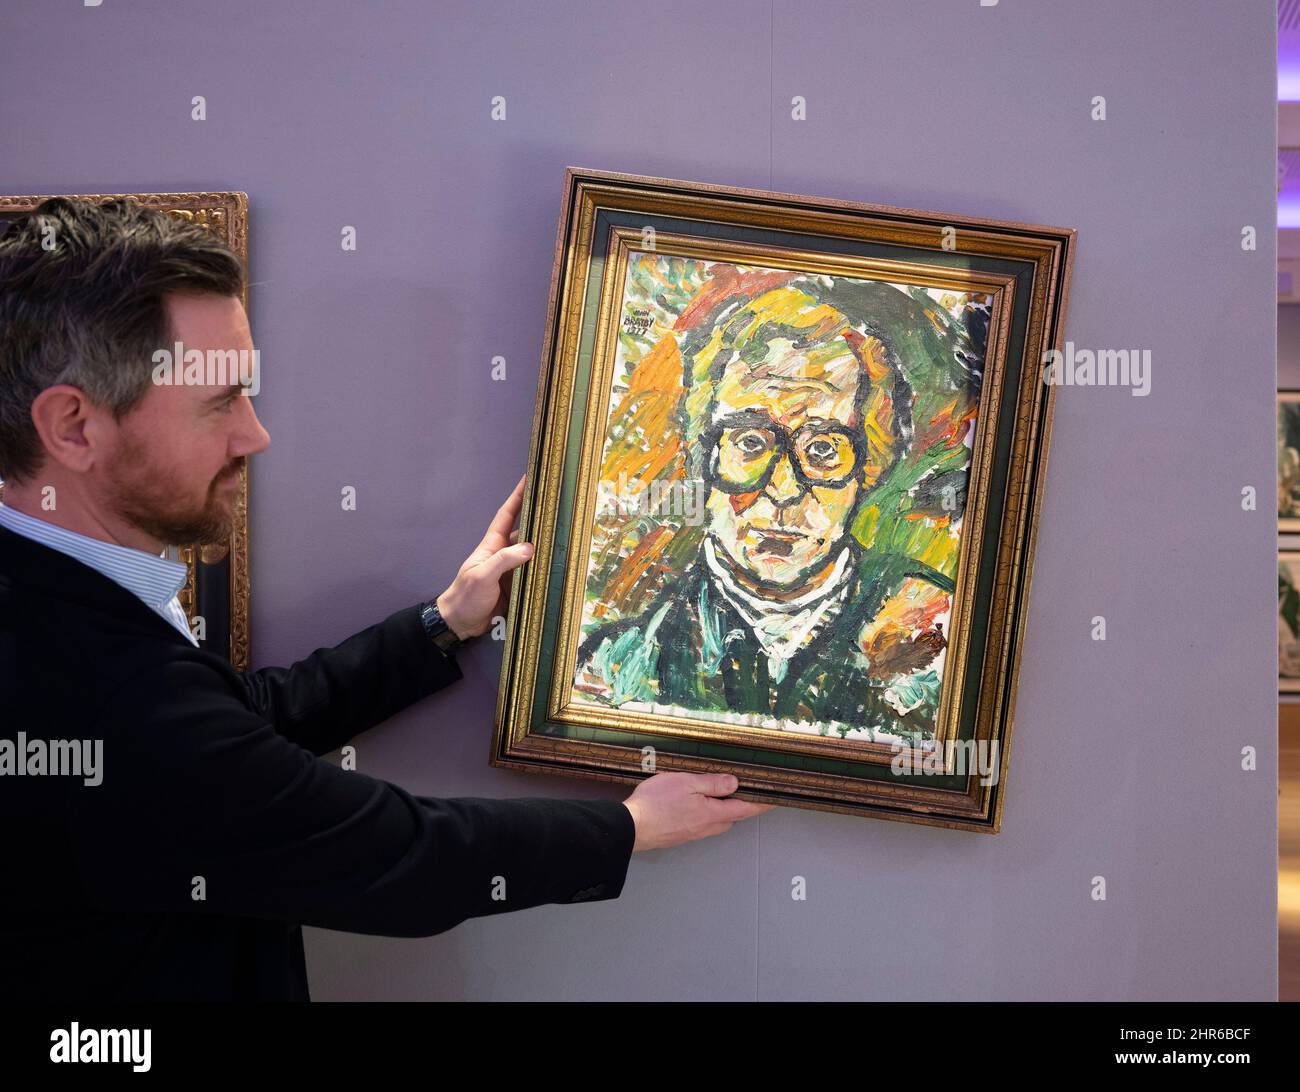 Bonhams, London, UK. 25 February 2022. Sir Michael Caine: The Personal Collection preview before sale on 2 March 2022. He and his wife, Lady Caine, are downsizing and have put some of their treasured possessions up for auction. Image: John Bratby R.A. (British 1928-1992). Portrait of Sir Michael Caine, estimate: £2,000-3,000. Credit: Malcolm Park/Alamy Live News Stock Photo